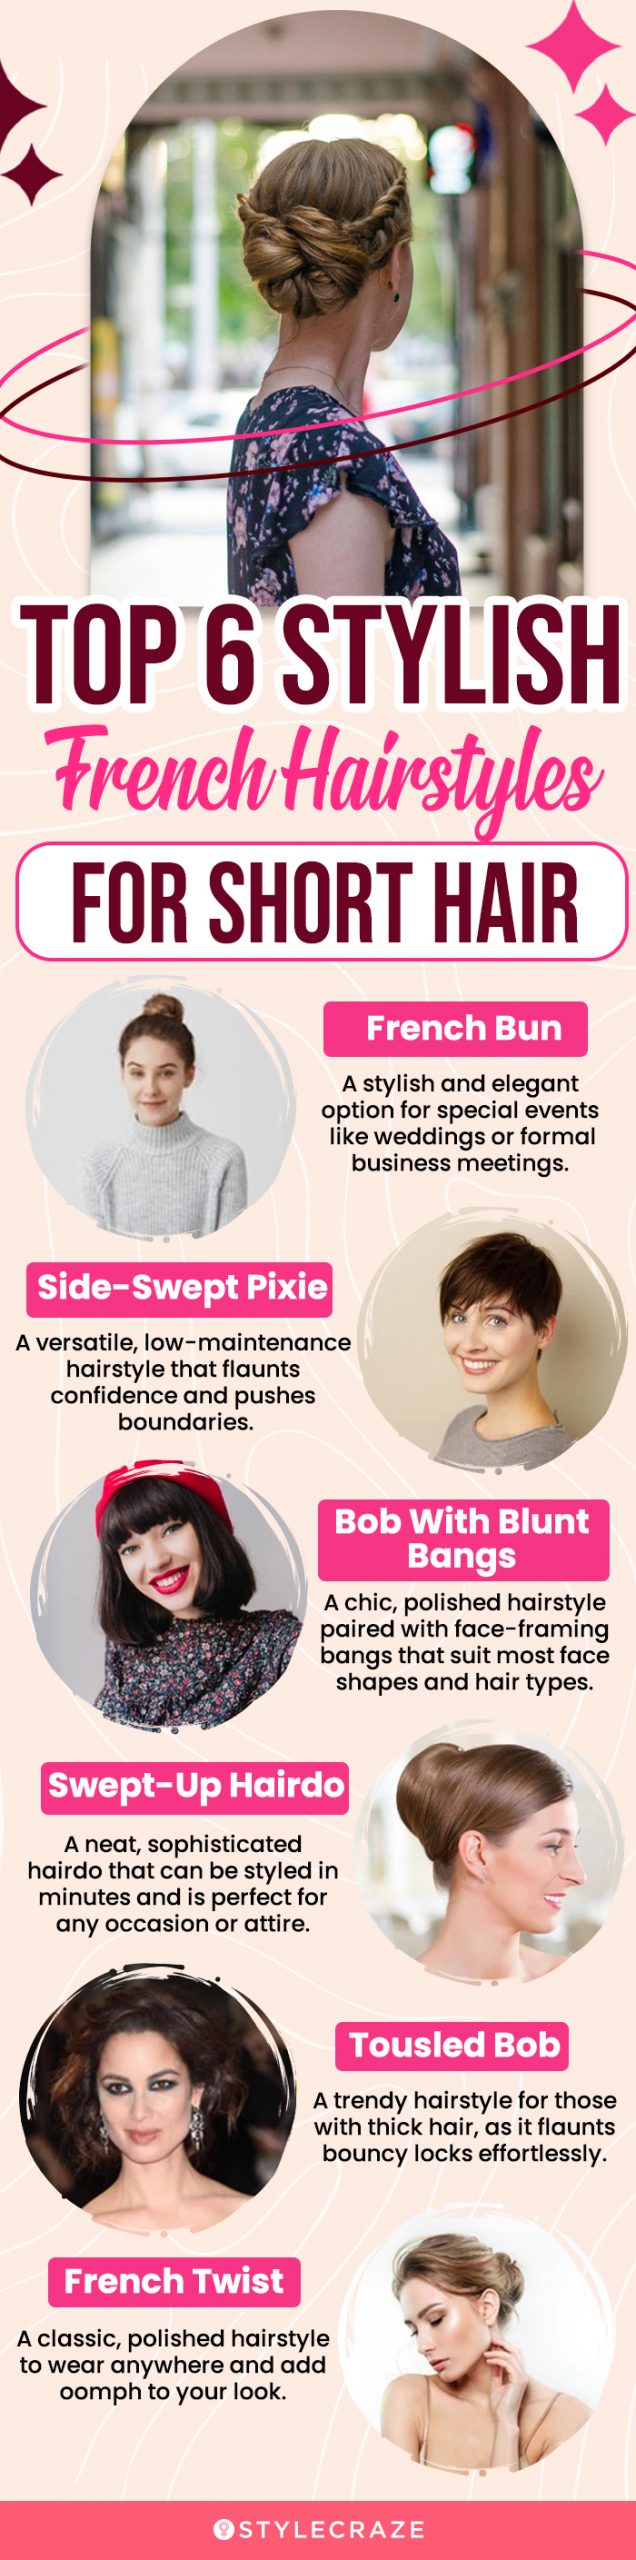 top 6 stylish french hairstyles for short hair (infographic)